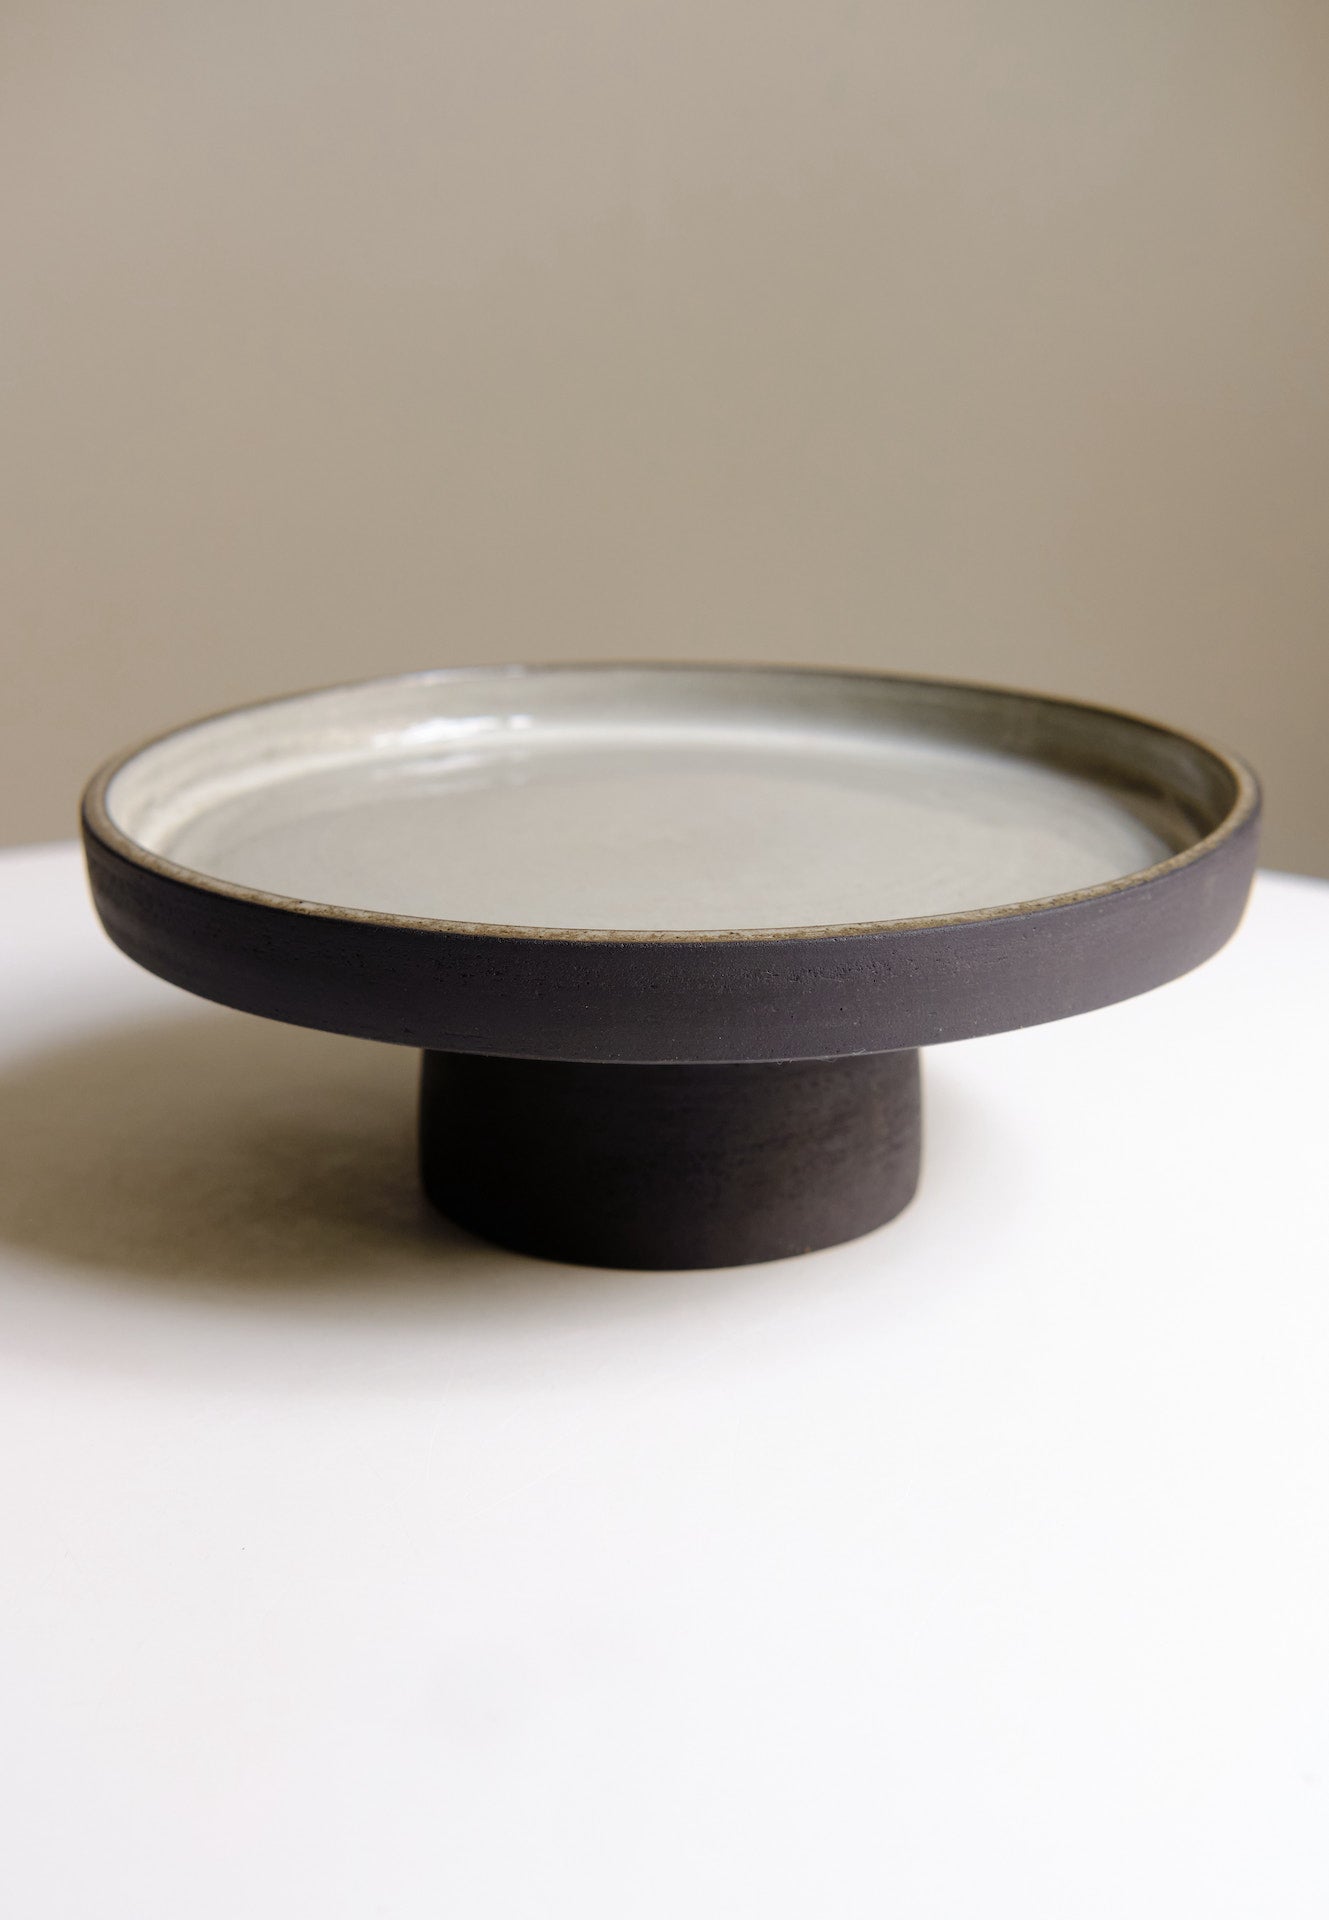 Cake stand in black